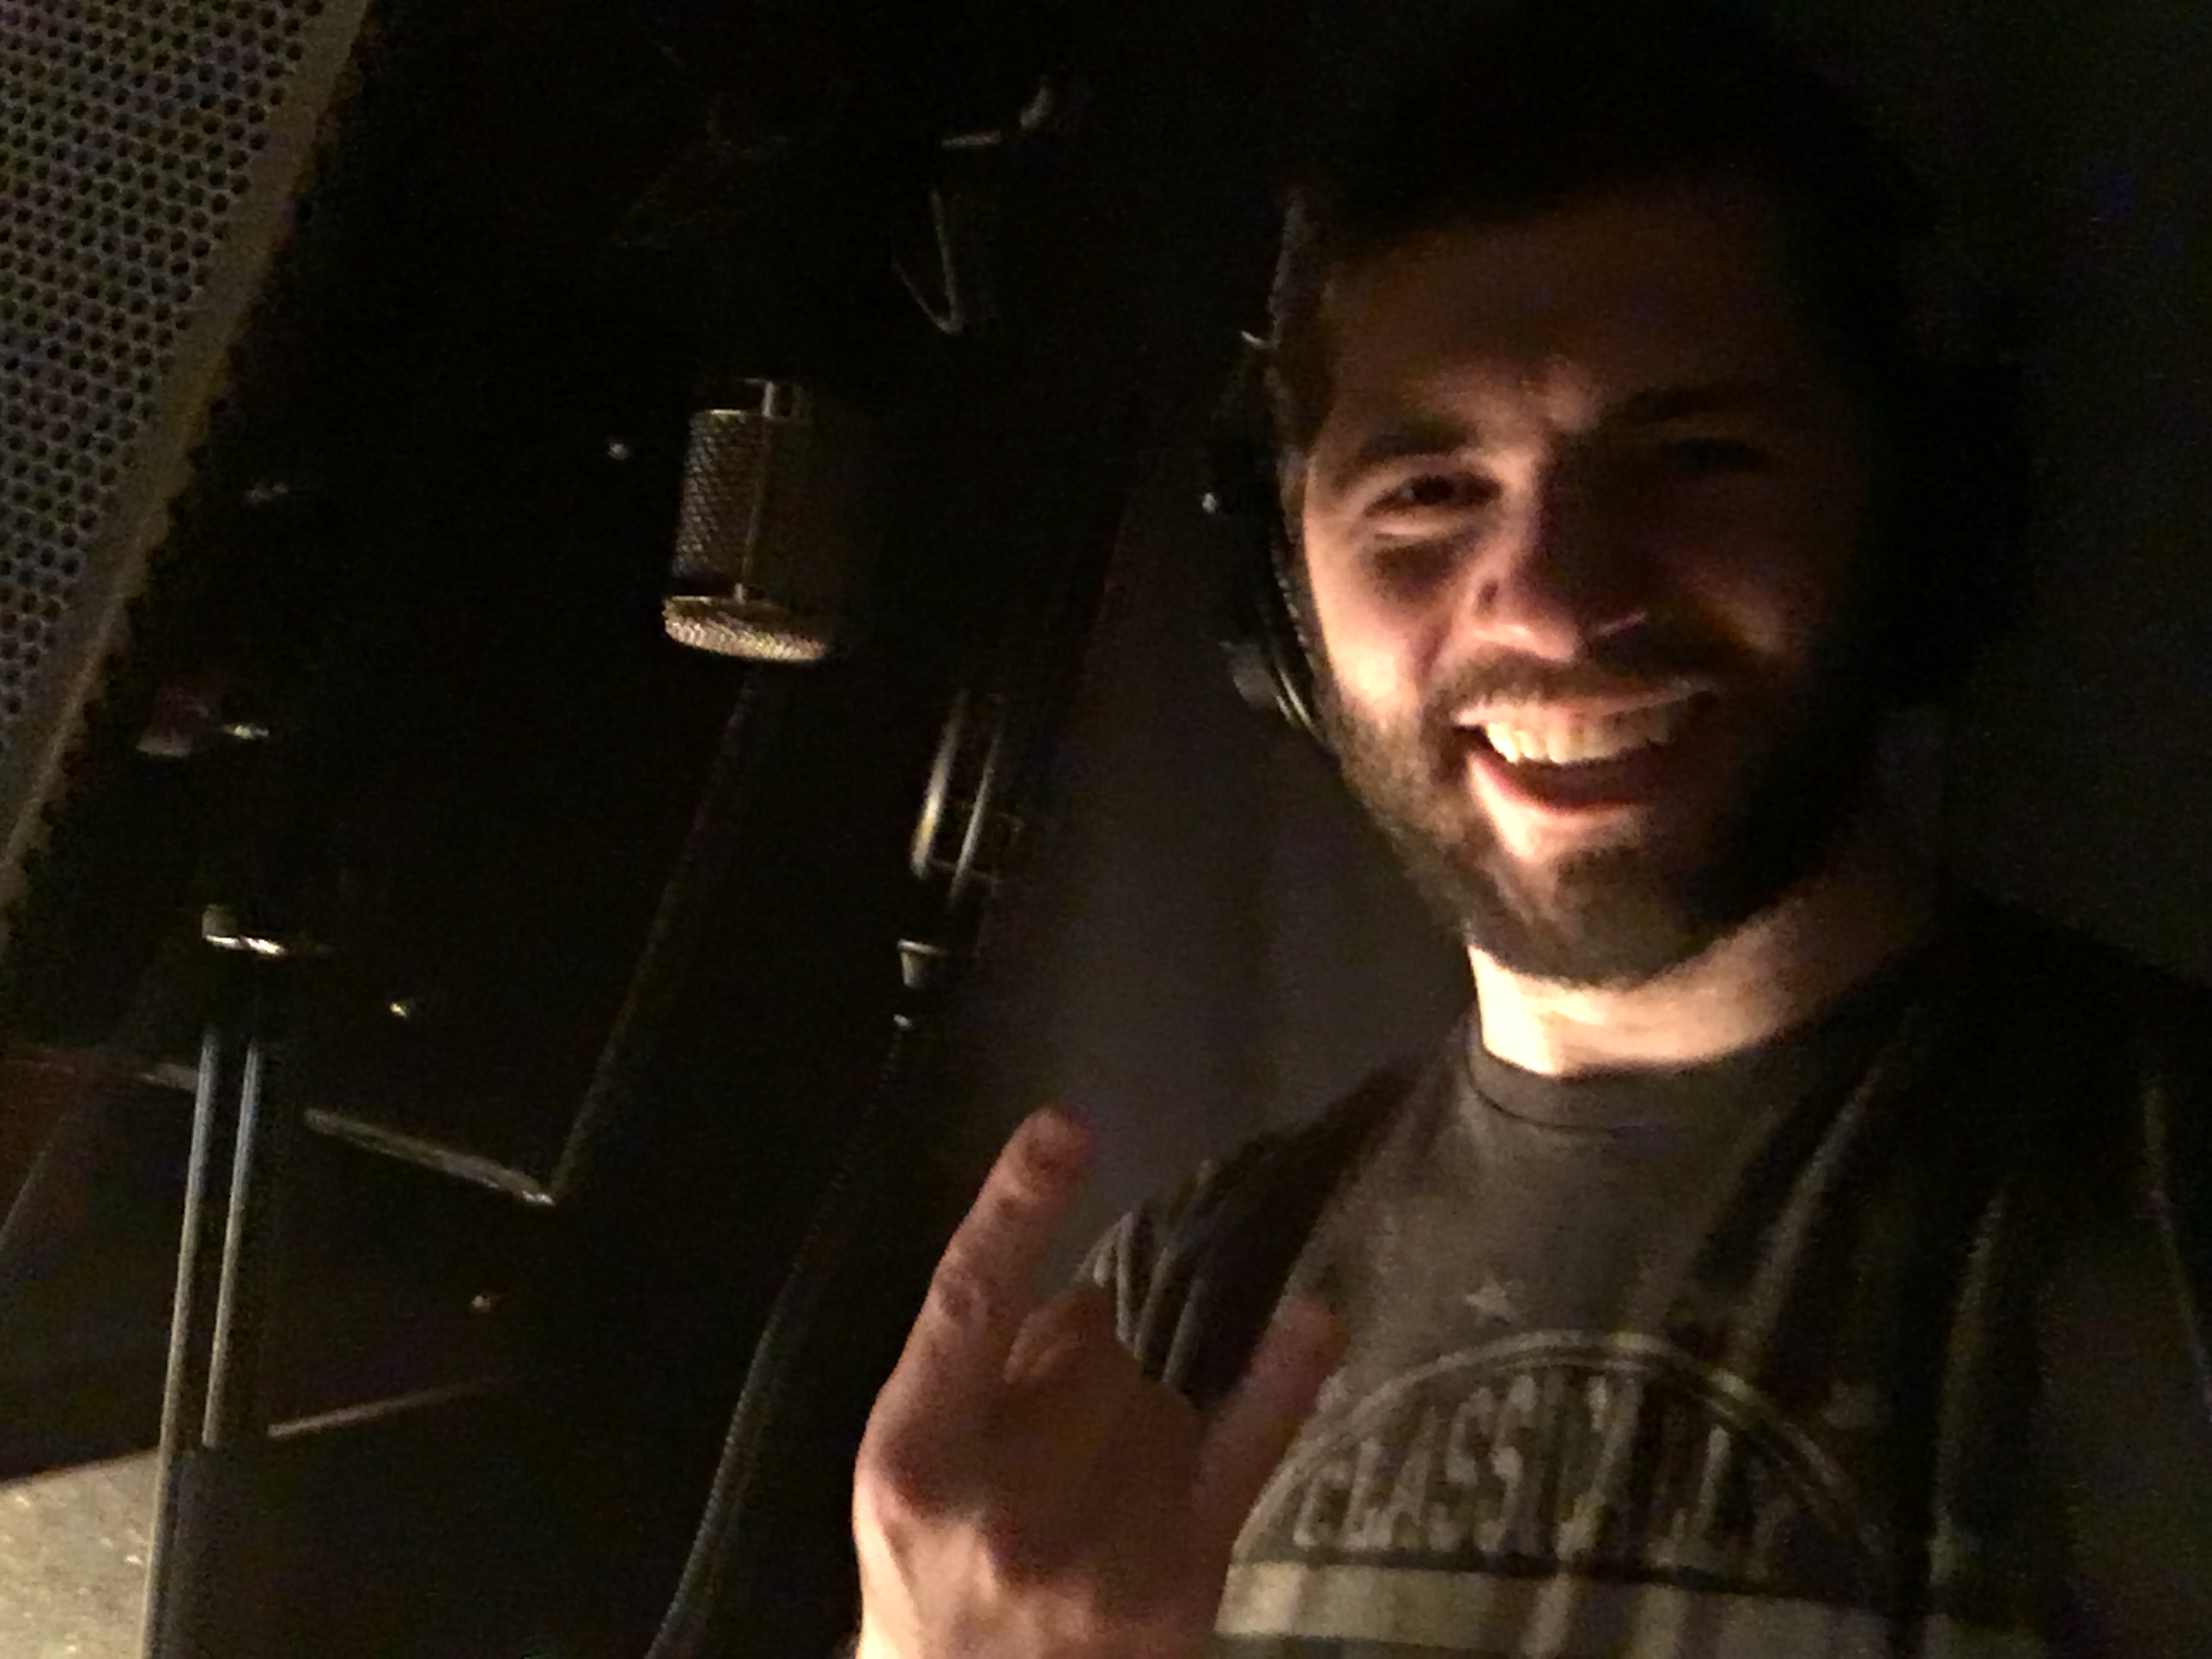 A selfie of Bryce Kalal smiling, showing "the horns" with his hand, and standing next to a microphone in a vocal recording booth.